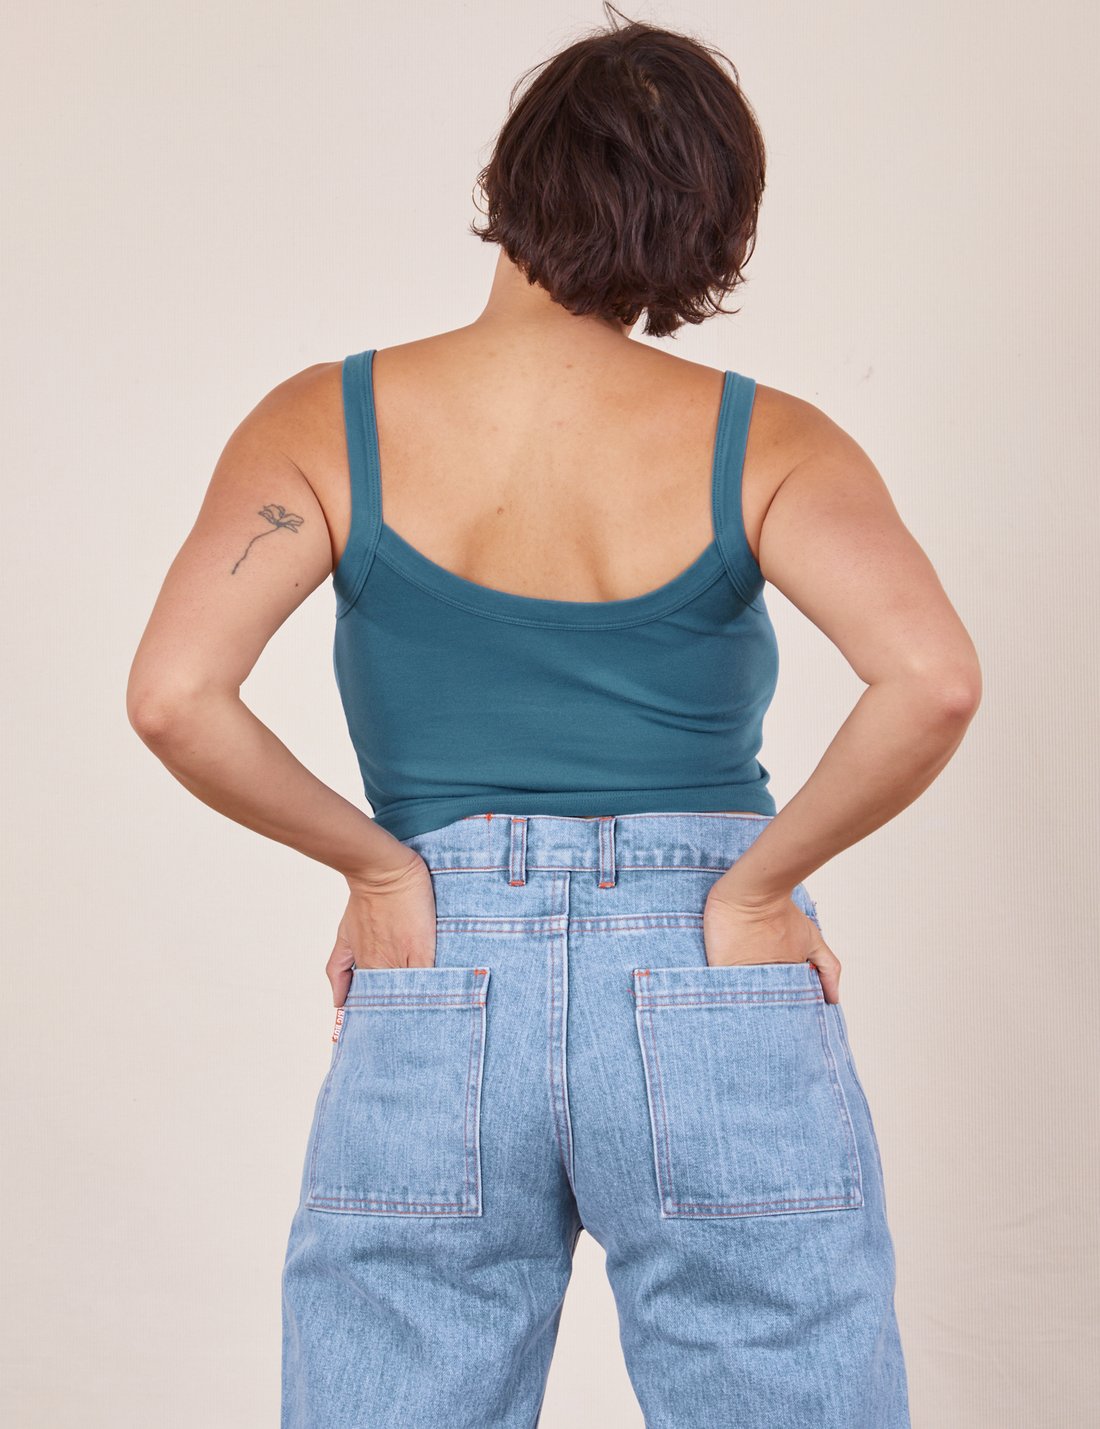 Back view of Cropped Cami in Marine Blue and light wash Sailor Jeans worn by Tiara. She has her hands in both back pant pockets.